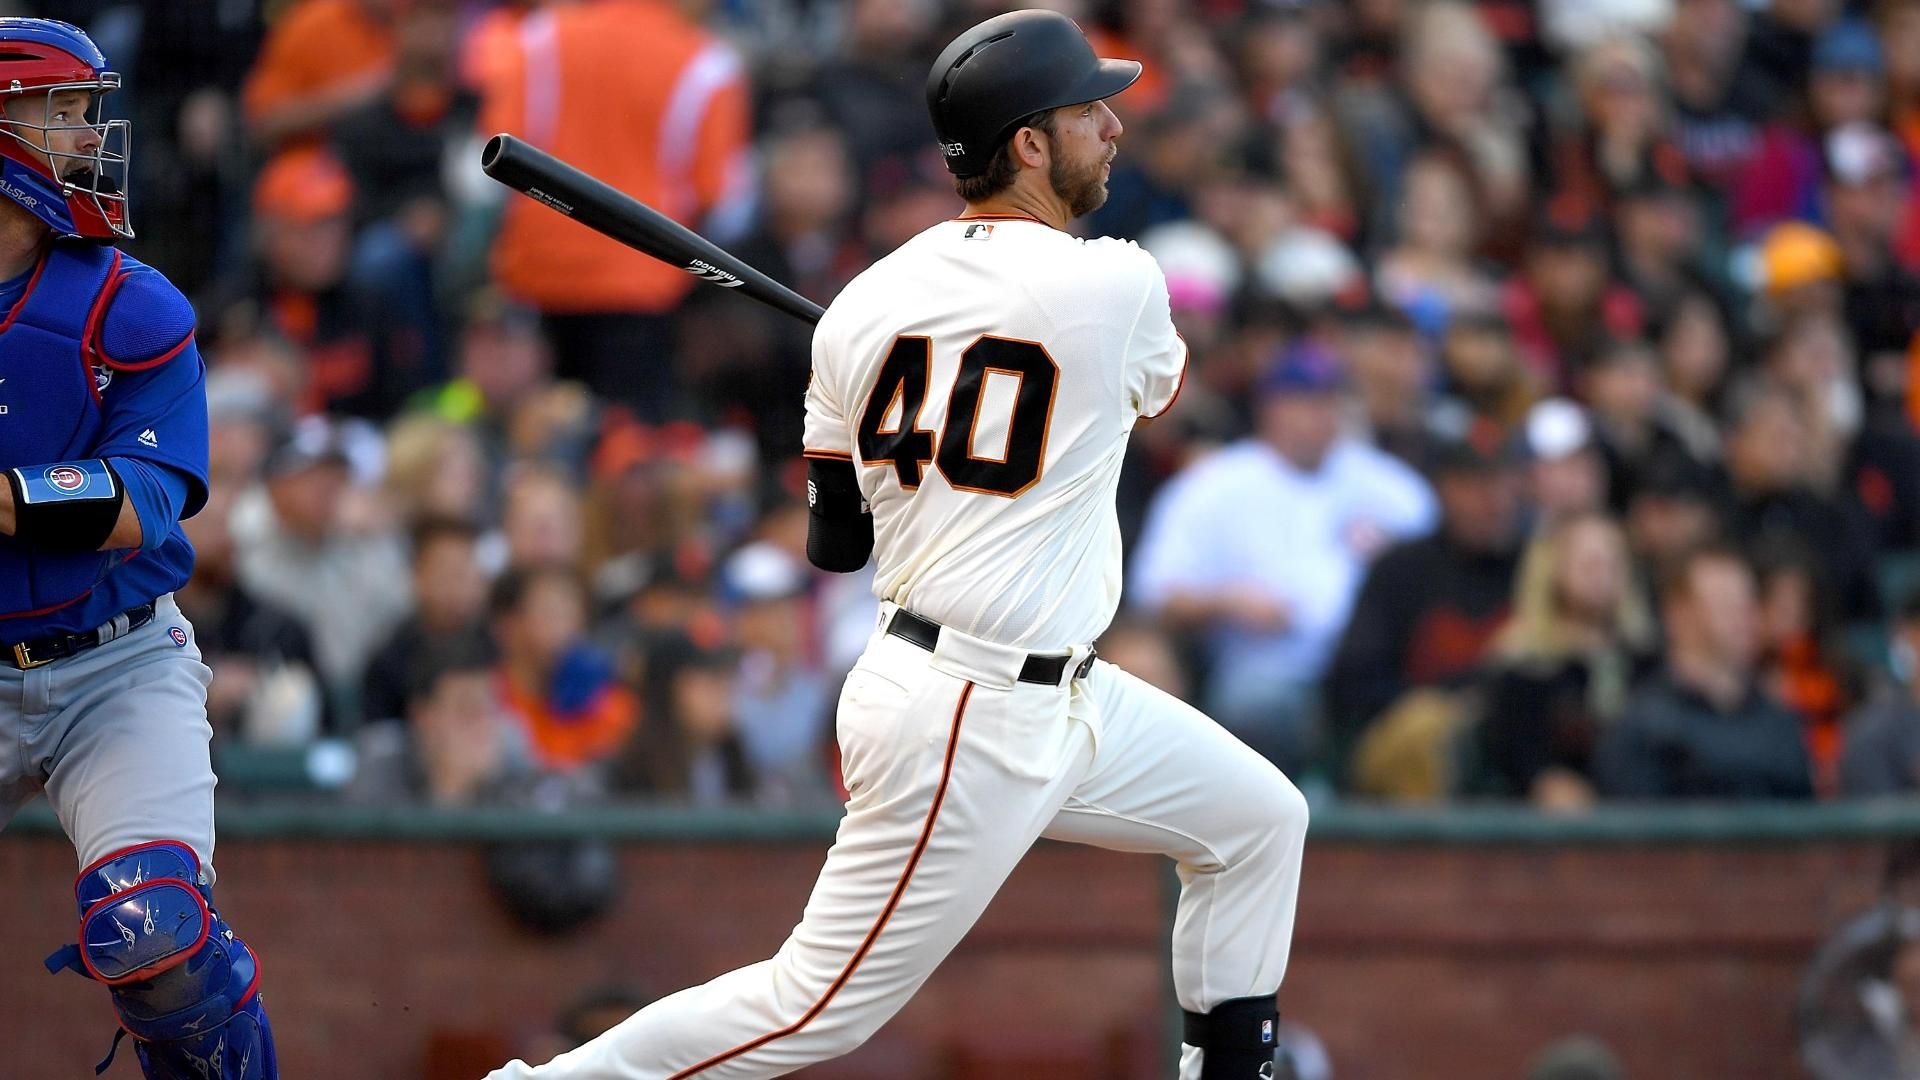 Mike & Mike support Bumgarner's Home Run Derby aspirations